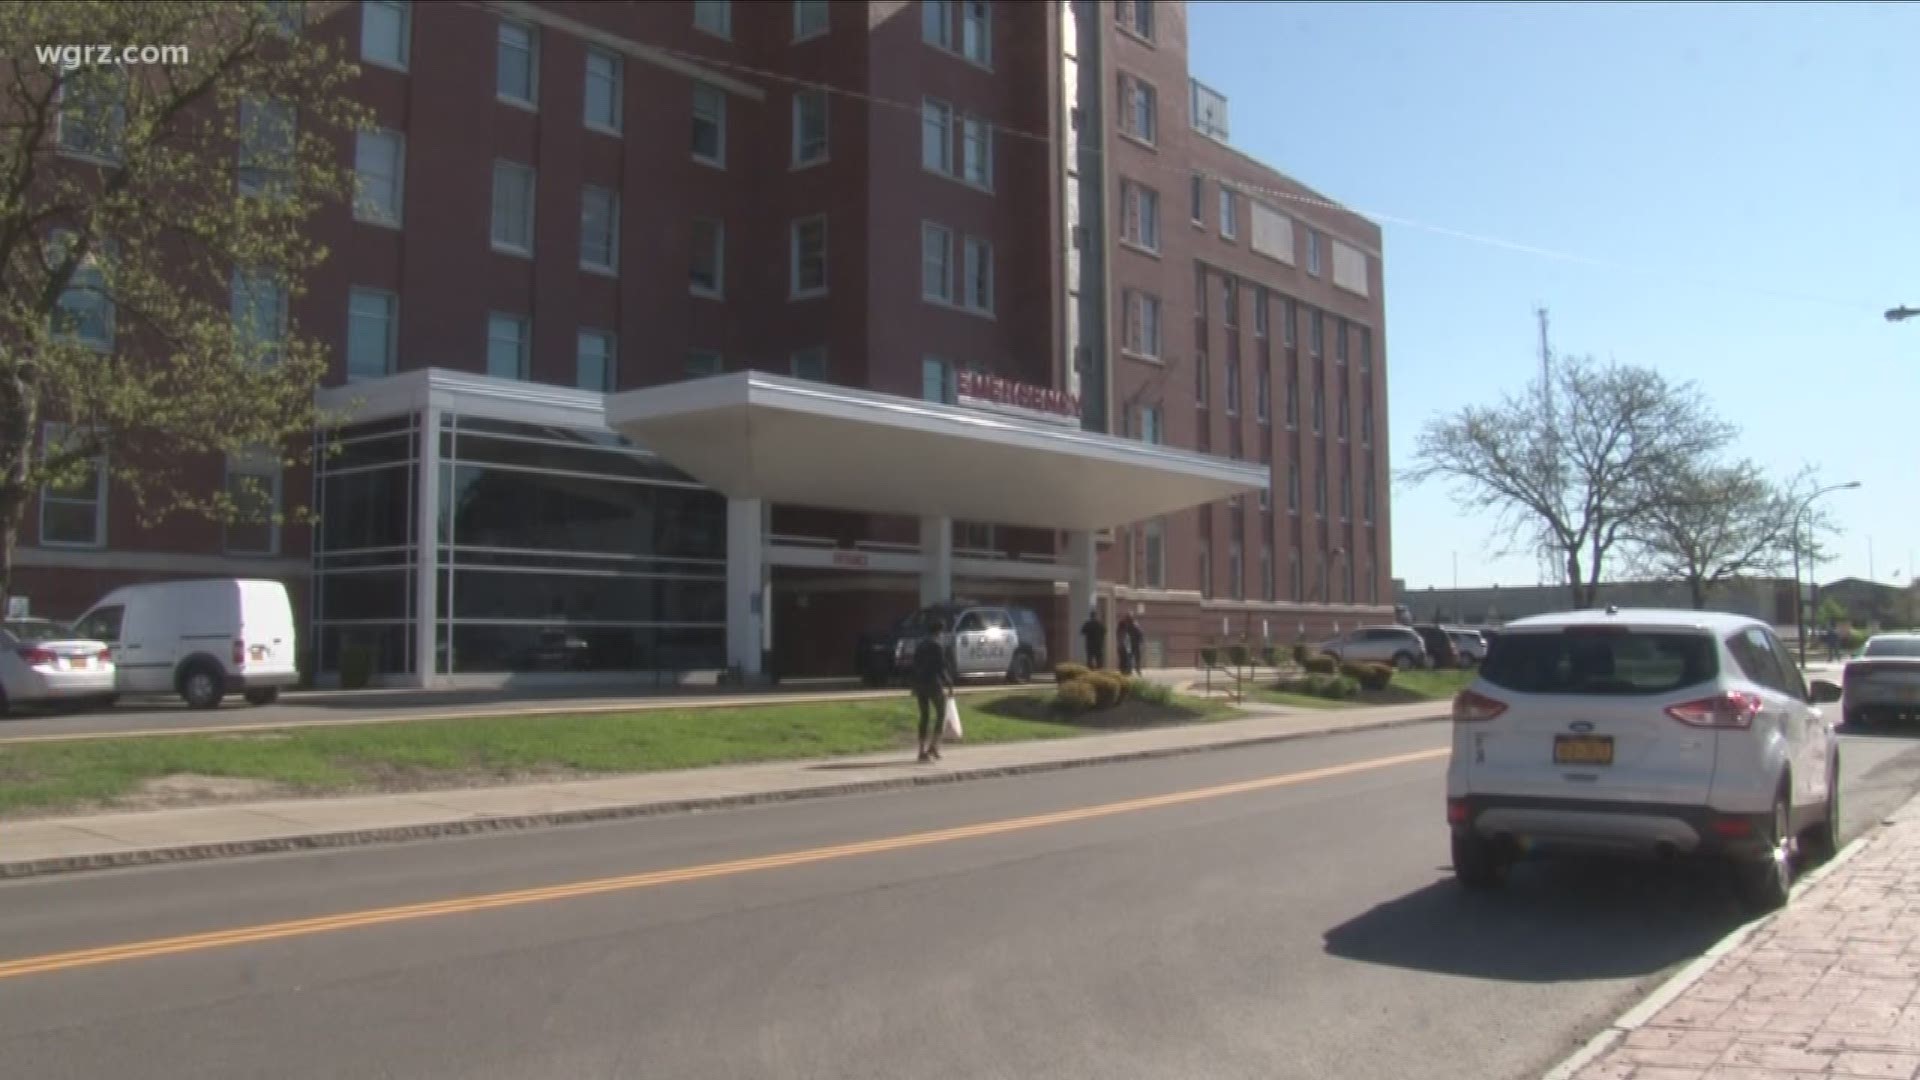 police quickly searched the hospital campus on Main Street in Buffalo... and didn't find anything.